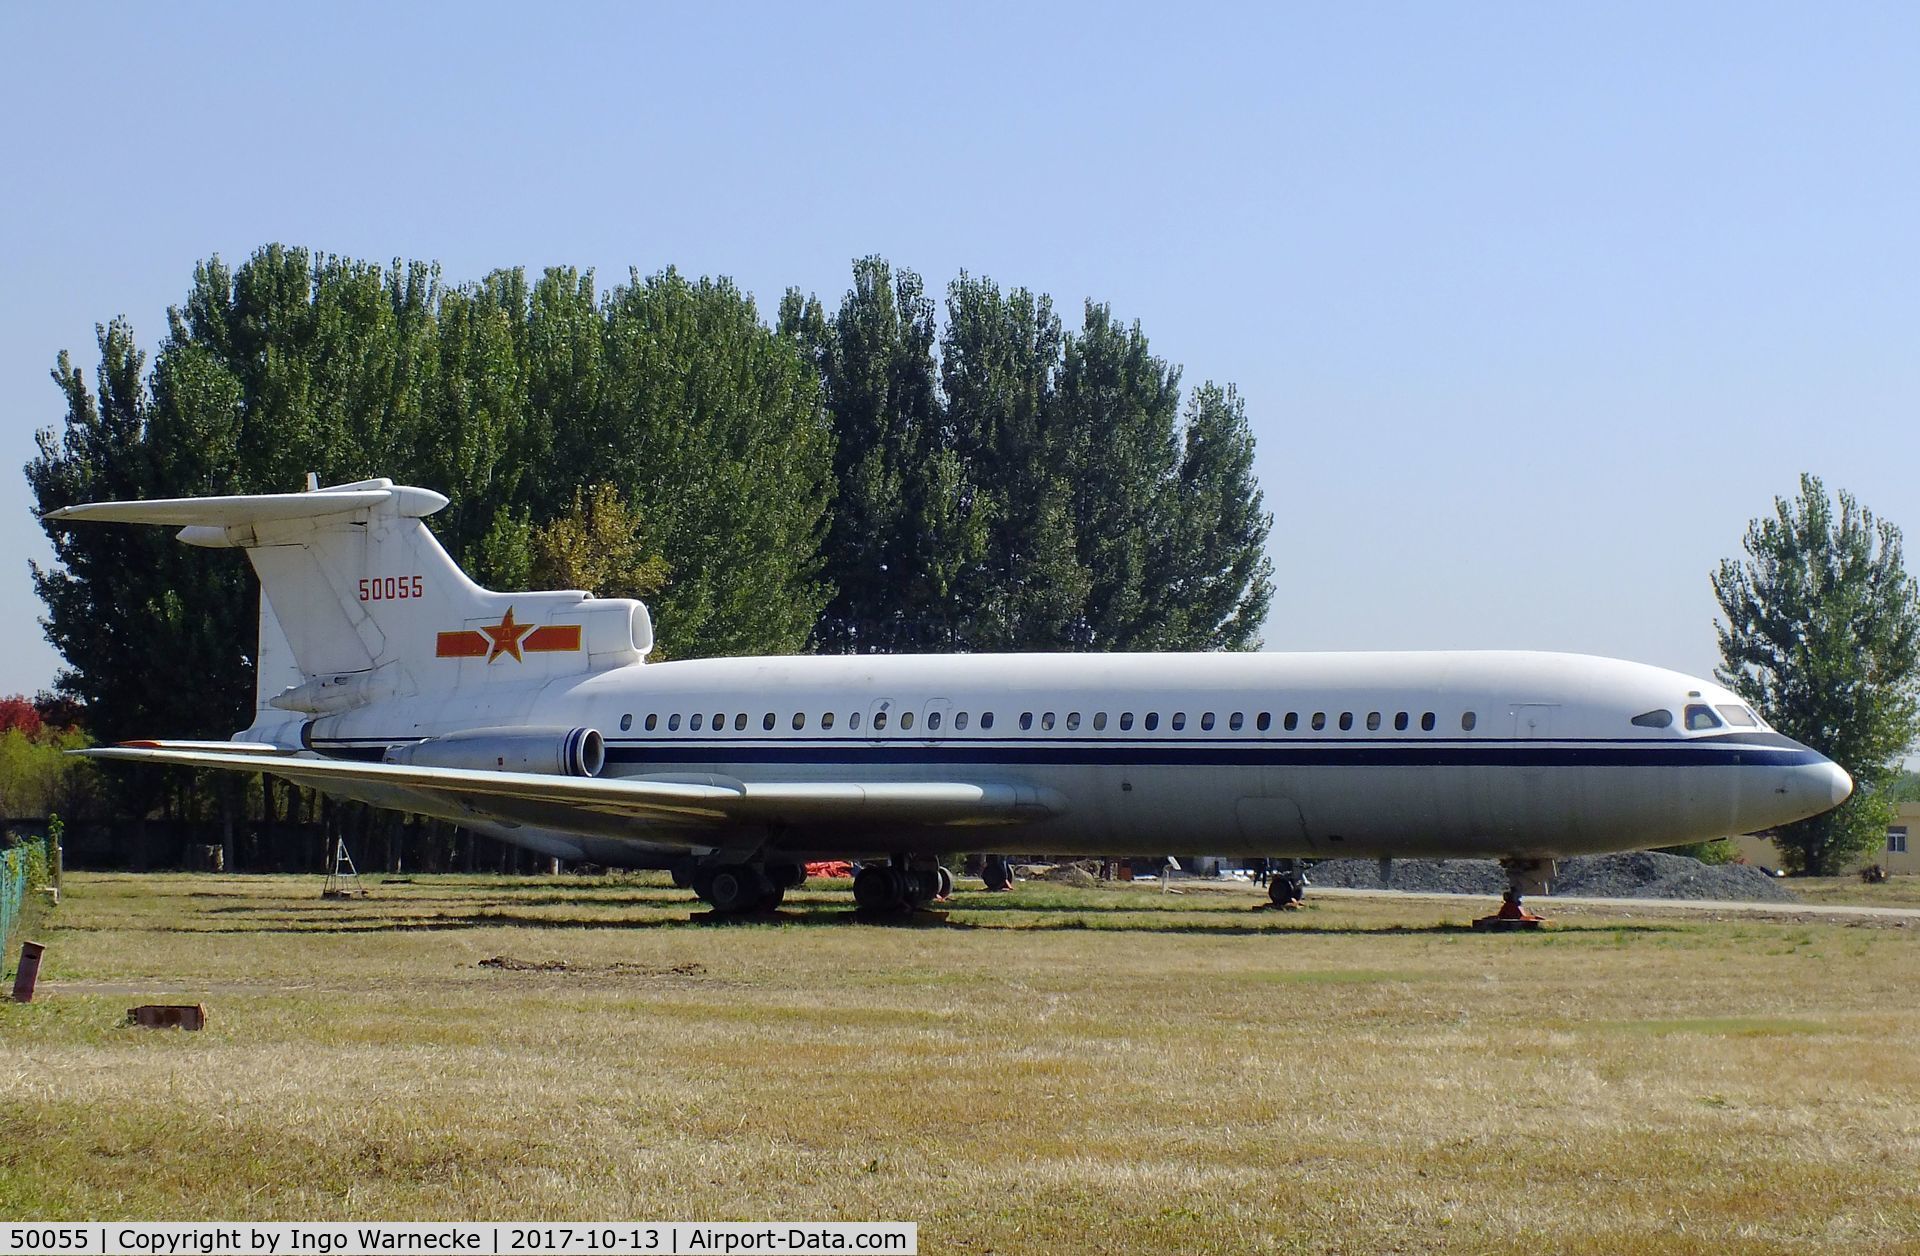 50055, 1977 Hawker Siddeley HS-121 Trident 2E C/N 2188, Hawker Siddeley HS.121 Trident 2E at the China Aviation Museum Datangshan